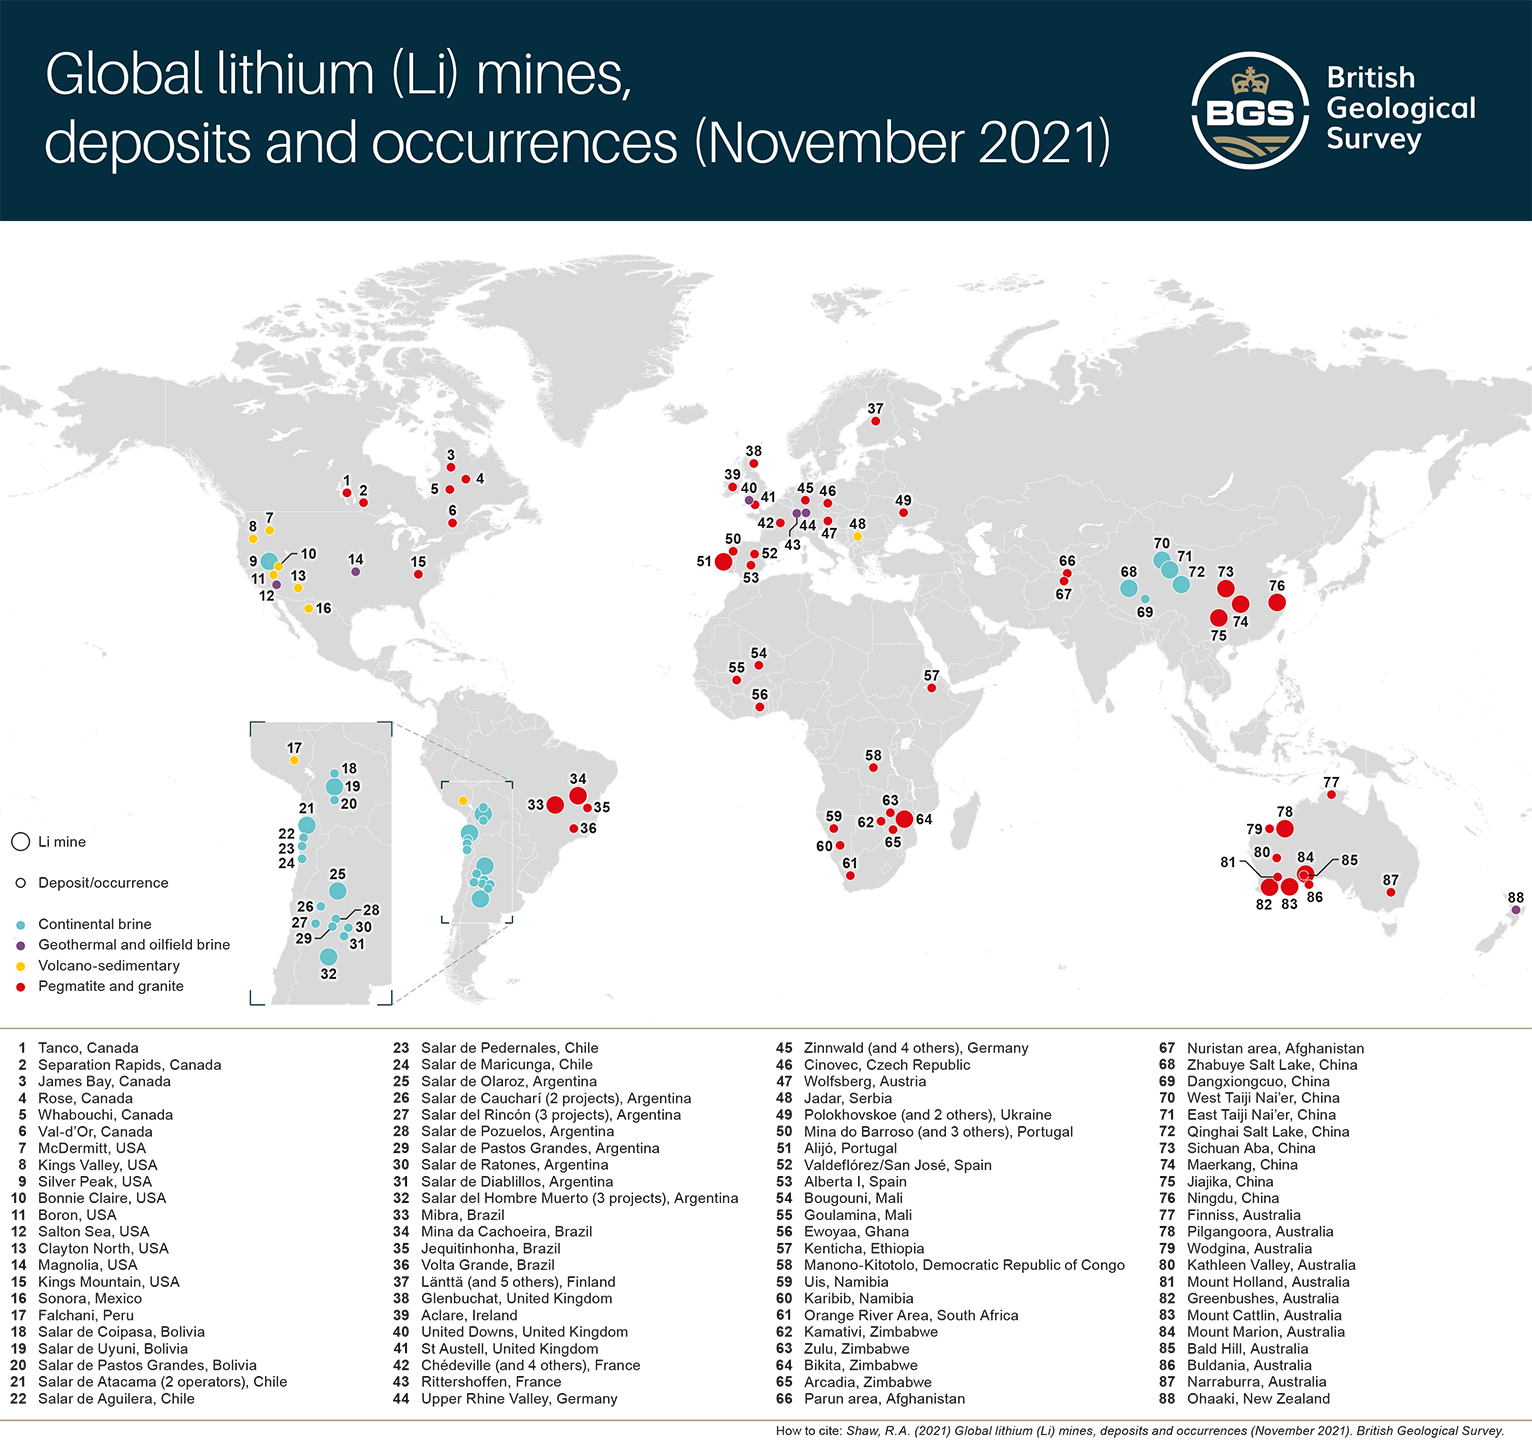 Download the Global lithium (Li) mines, deposits and occurrences map.